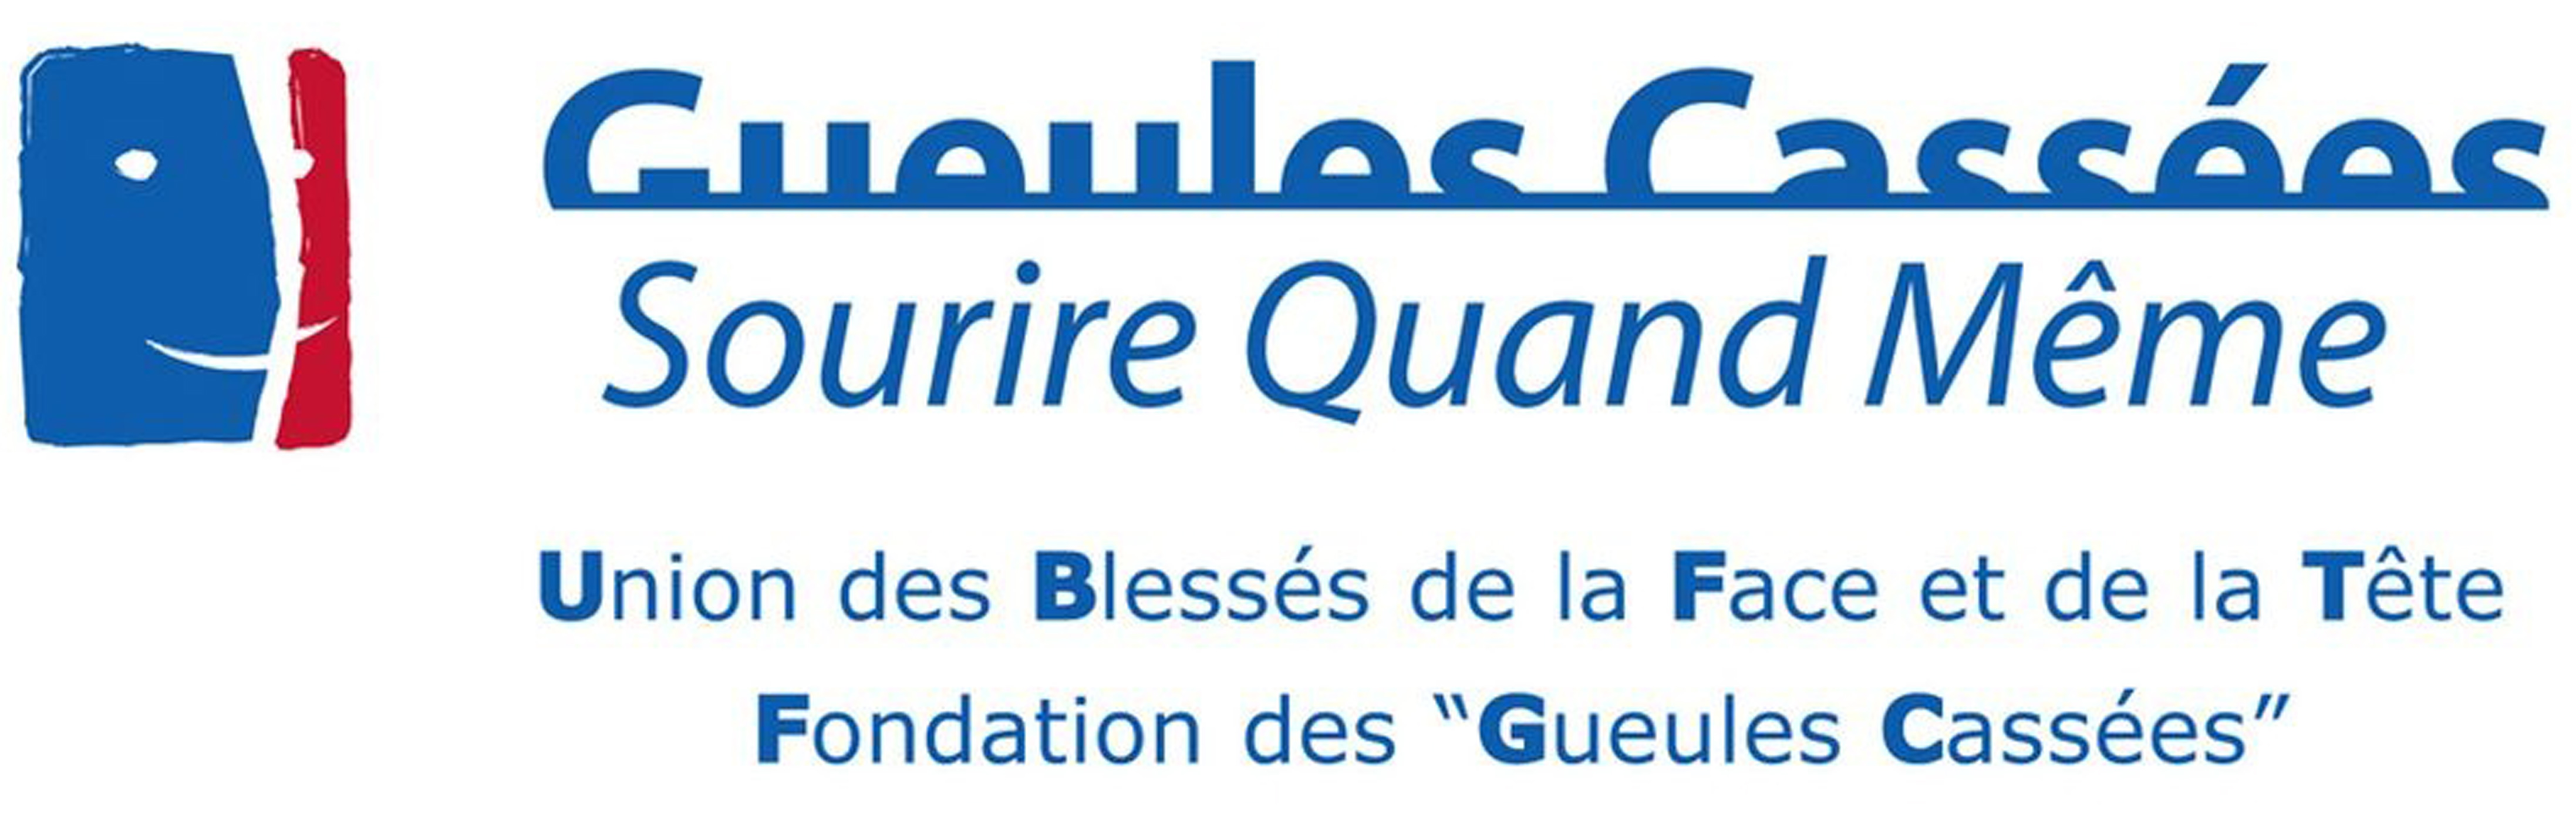 logo gueules cassees ubft